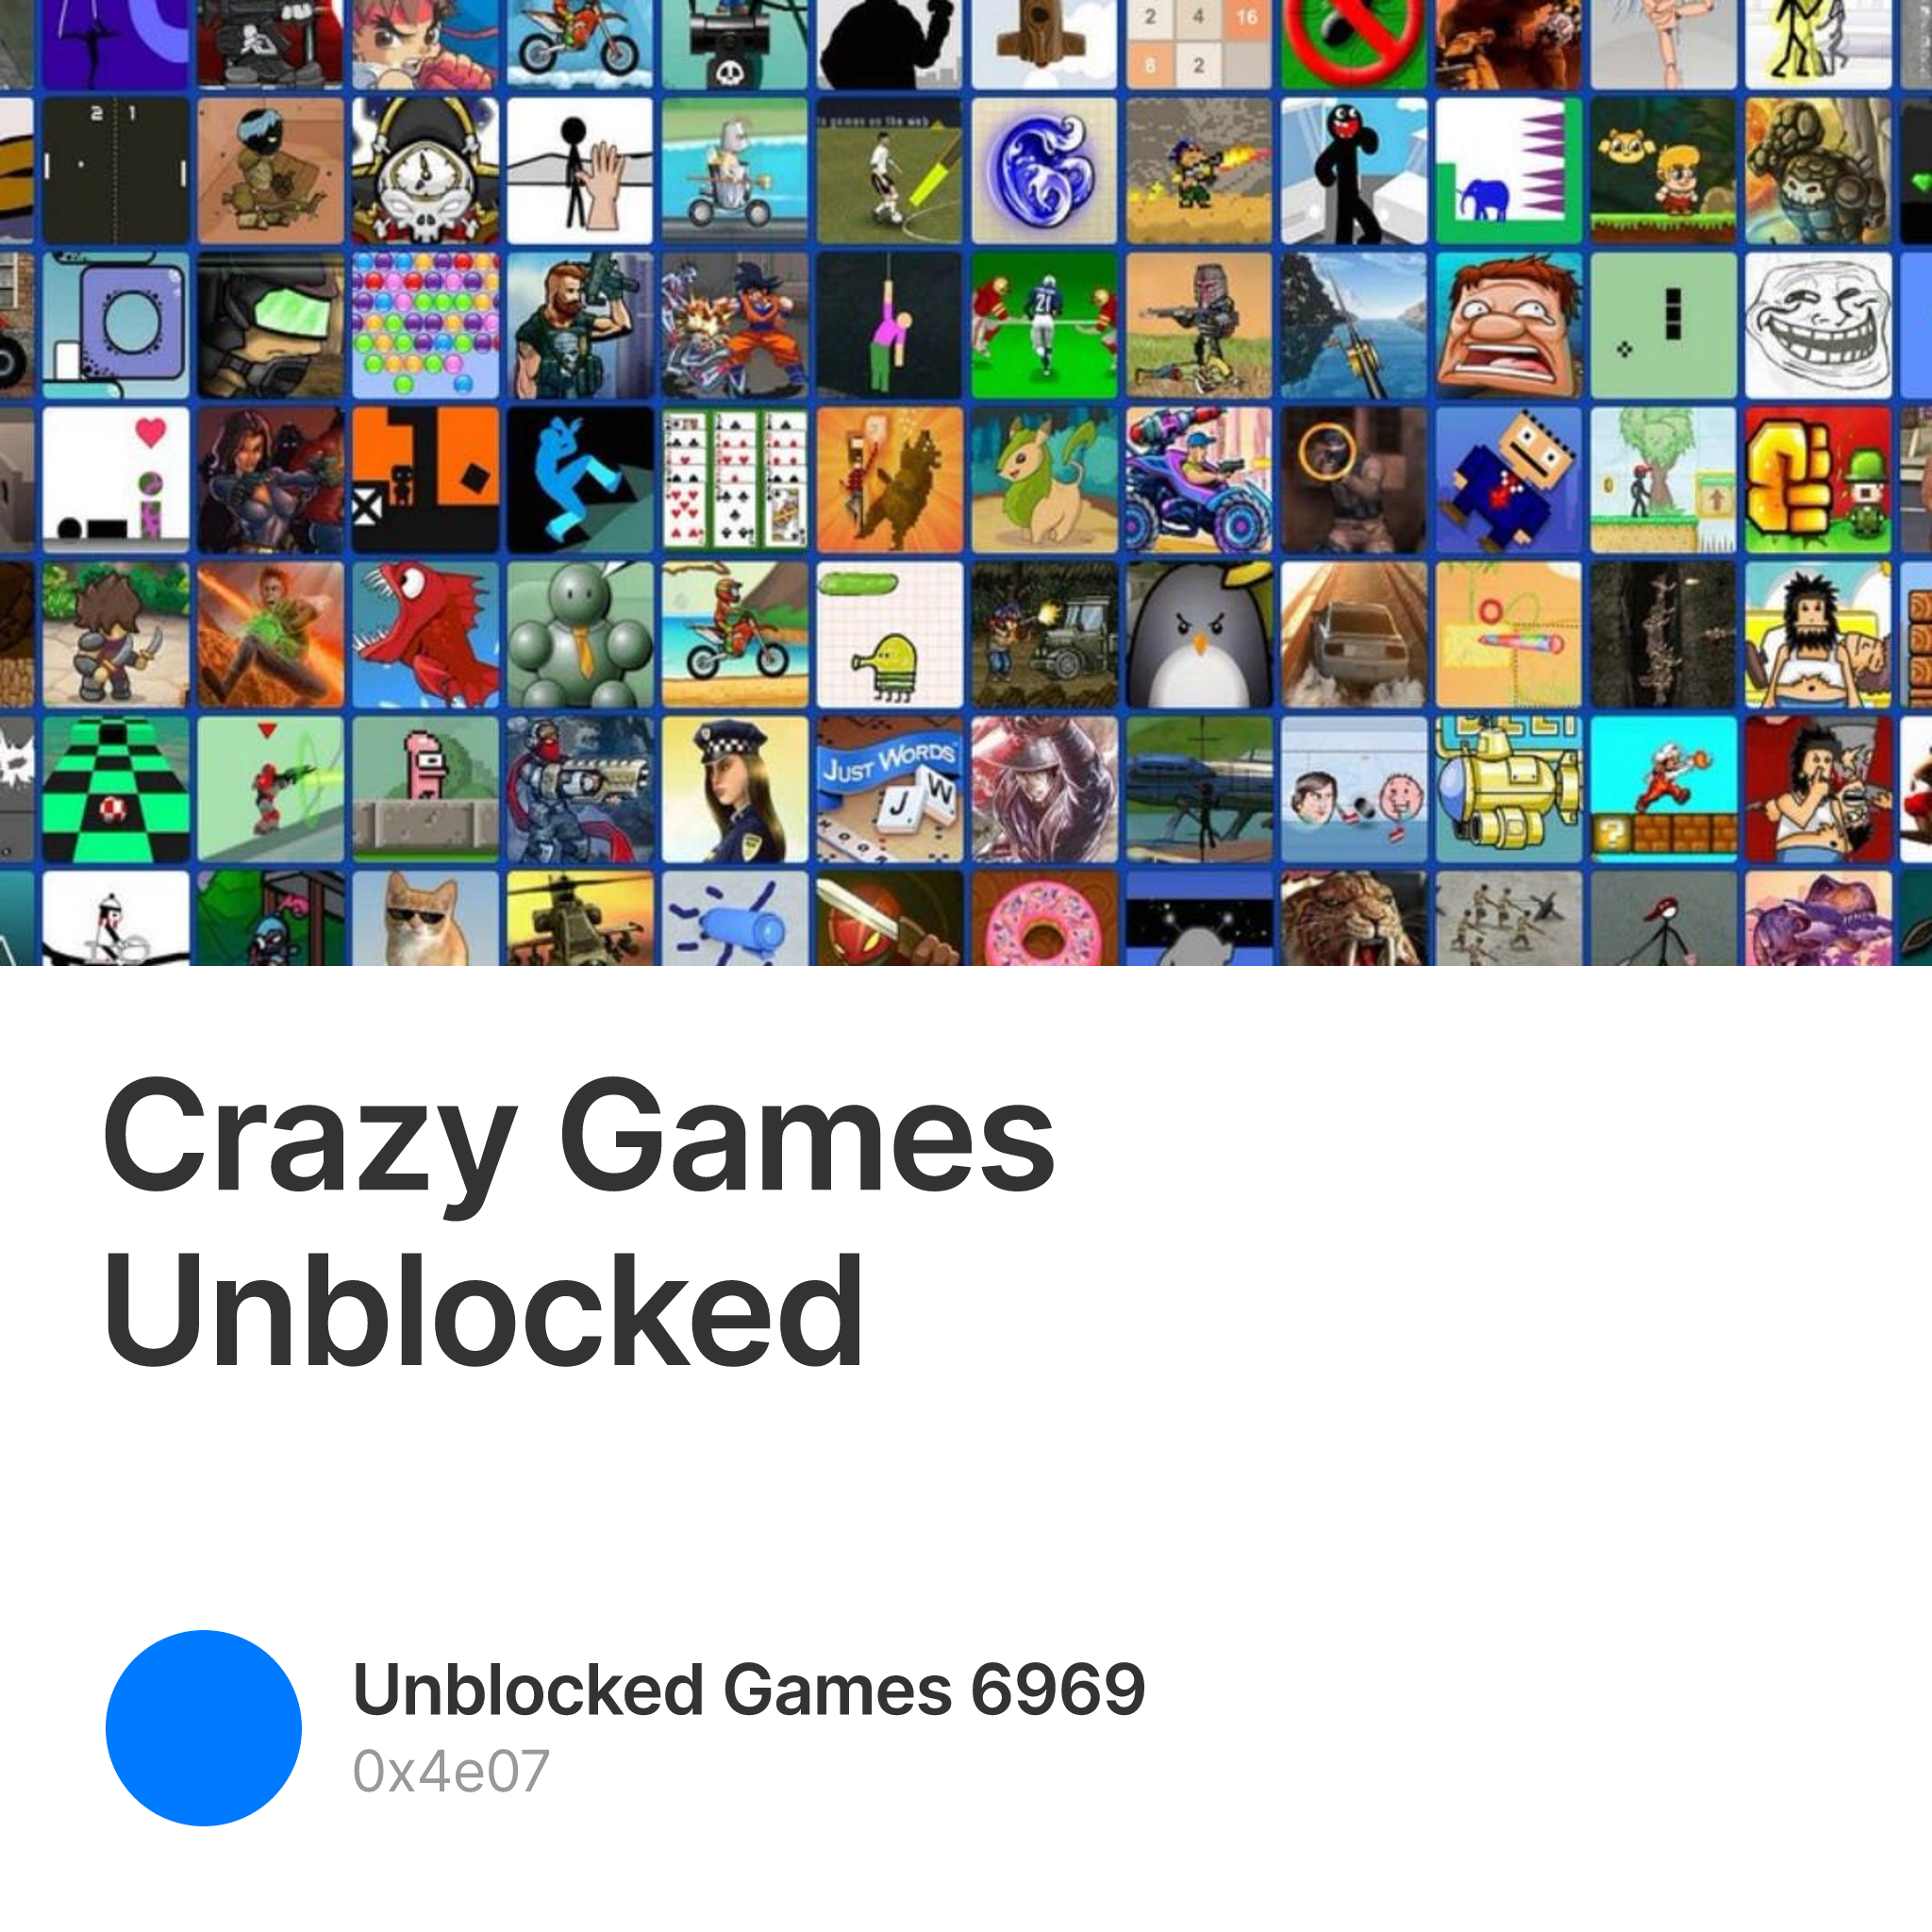 Play CrazyGames unblocked on these alternative domains 